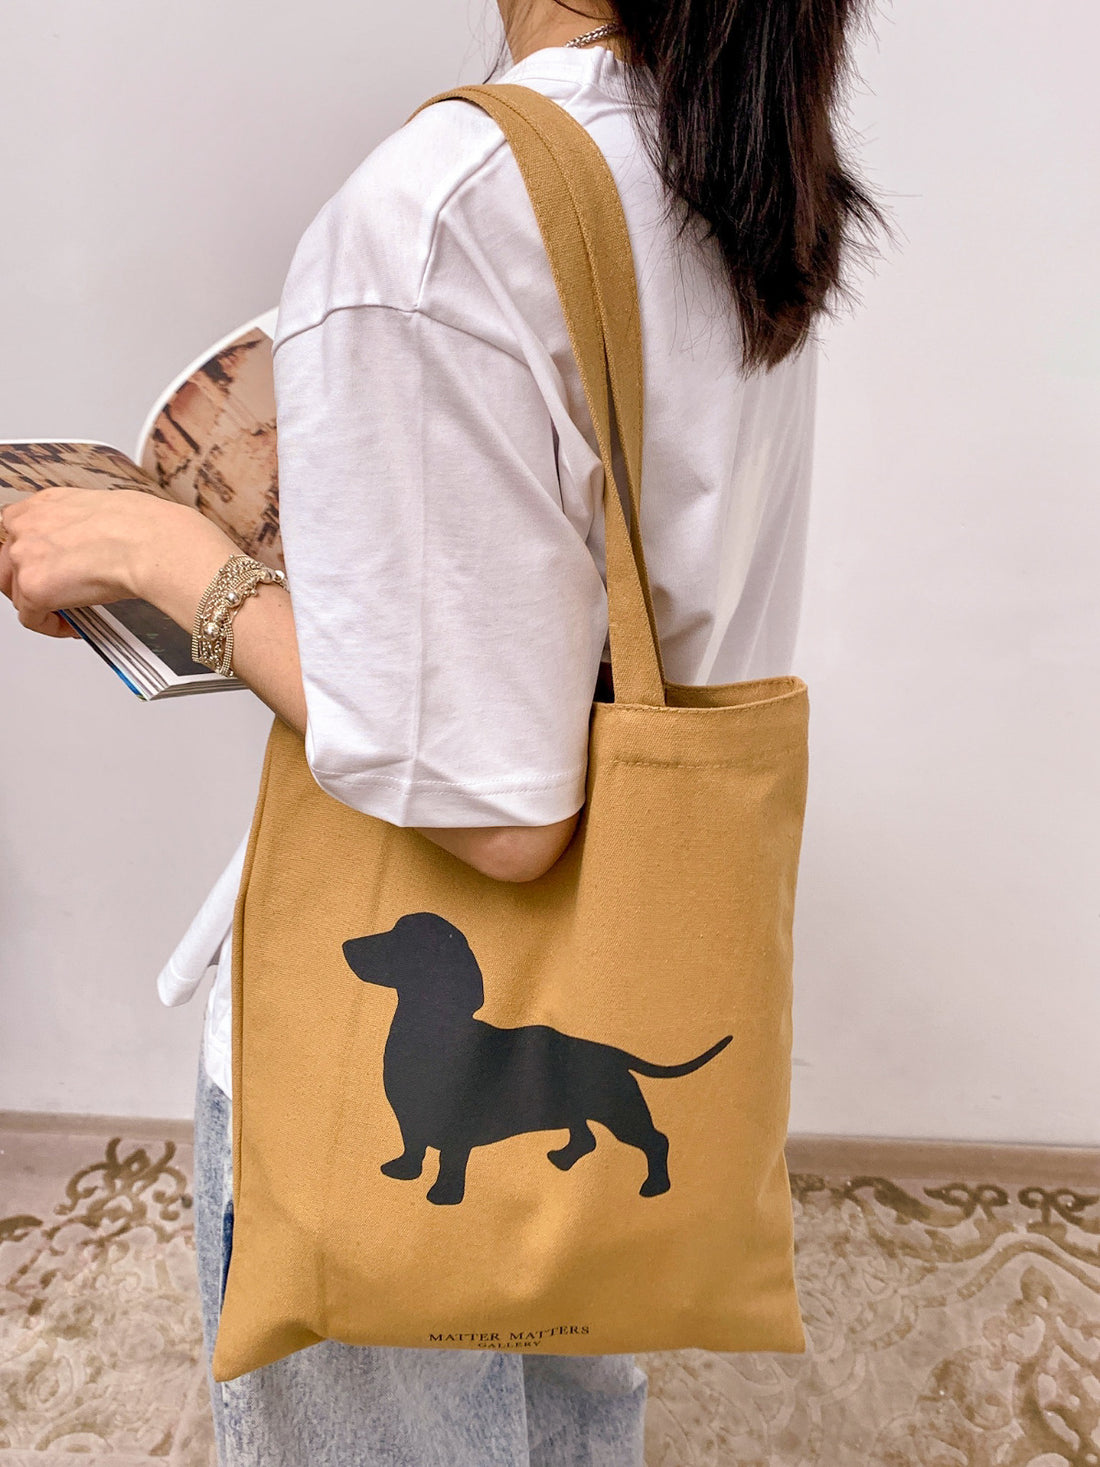 Talk to my dog • Brown/ Tote Bag